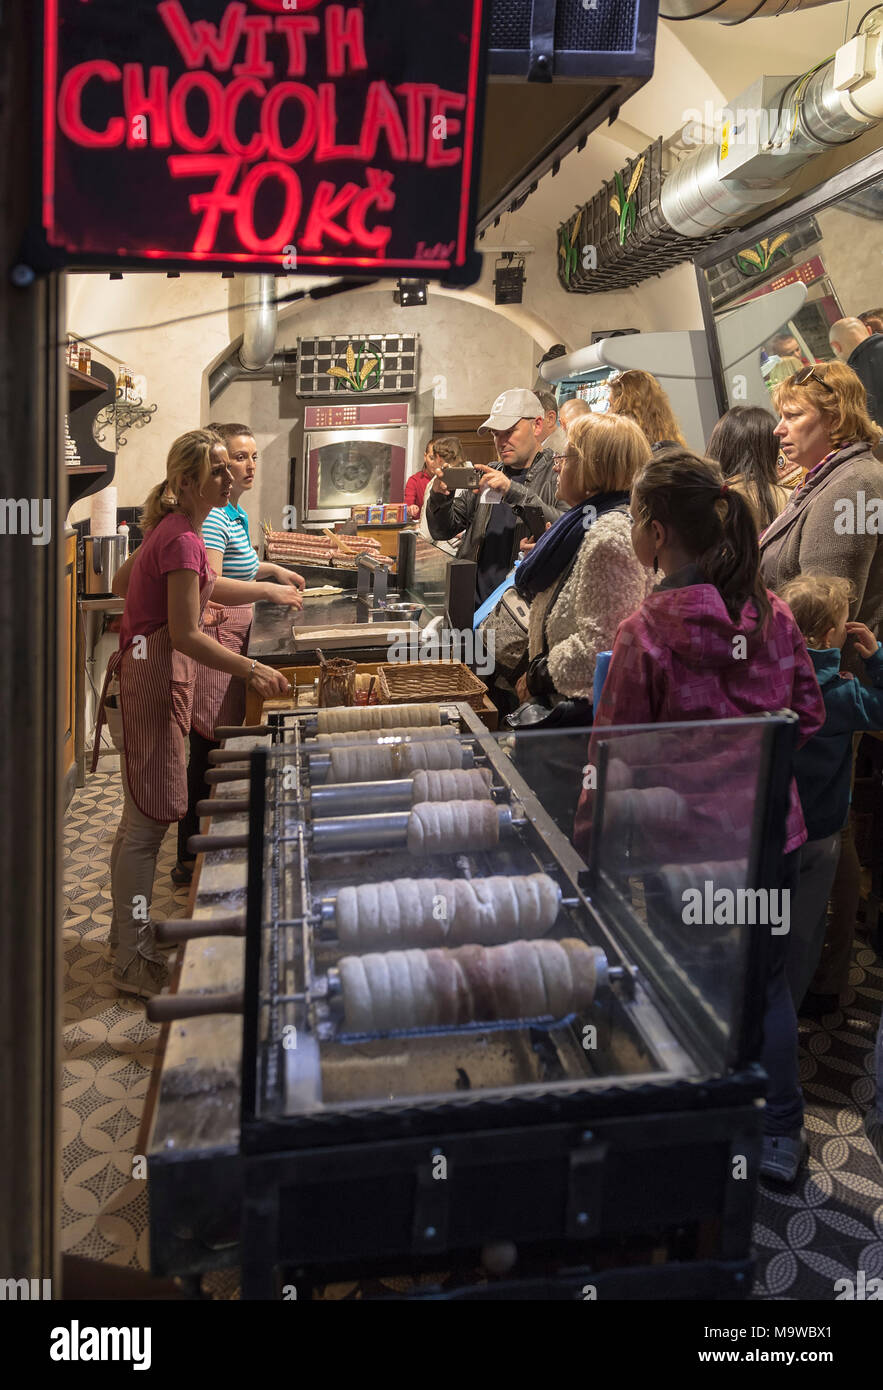 PRAGUE, CZECH REPUBLIC - MAY 02, 2015: A small bakery where they bake trdelniki - national sweet buns on May 2, 2015. Stock Photo